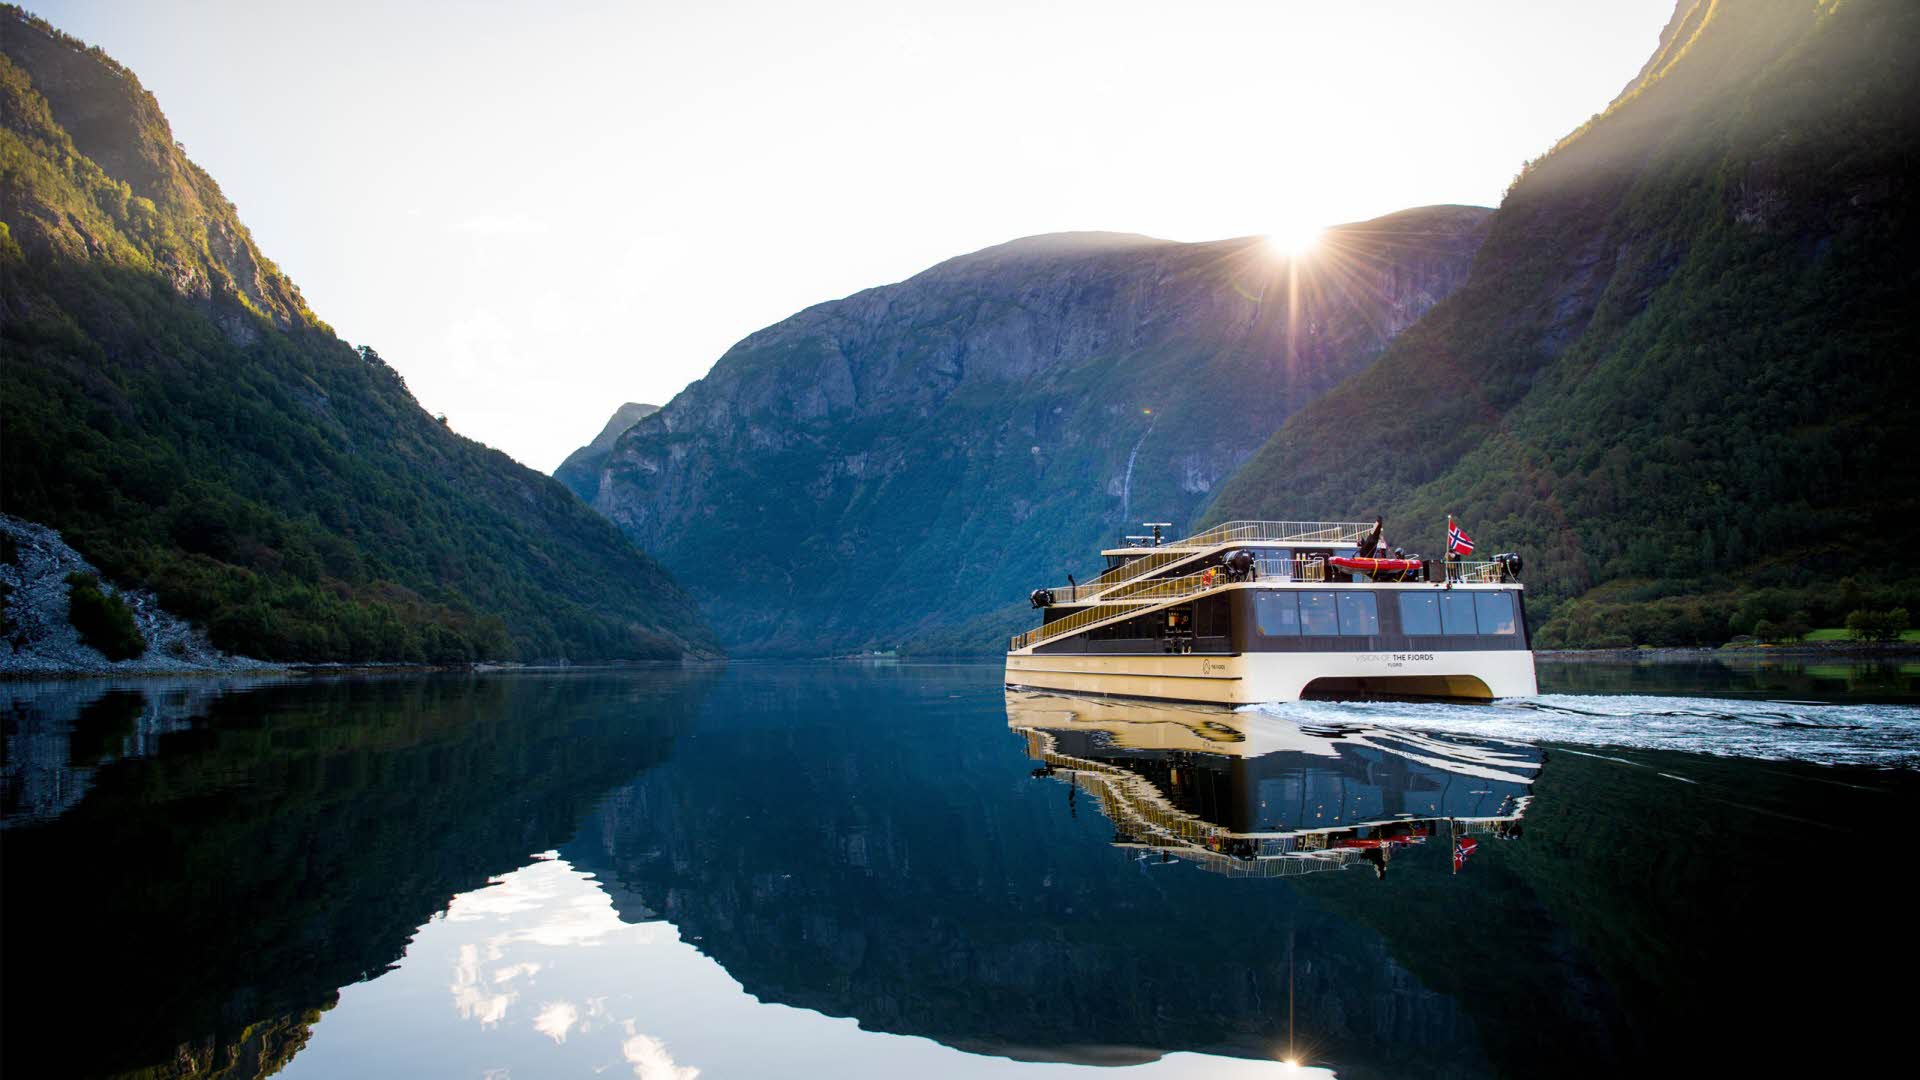 An electric boat sails across the Aurlandsfjord at dusk